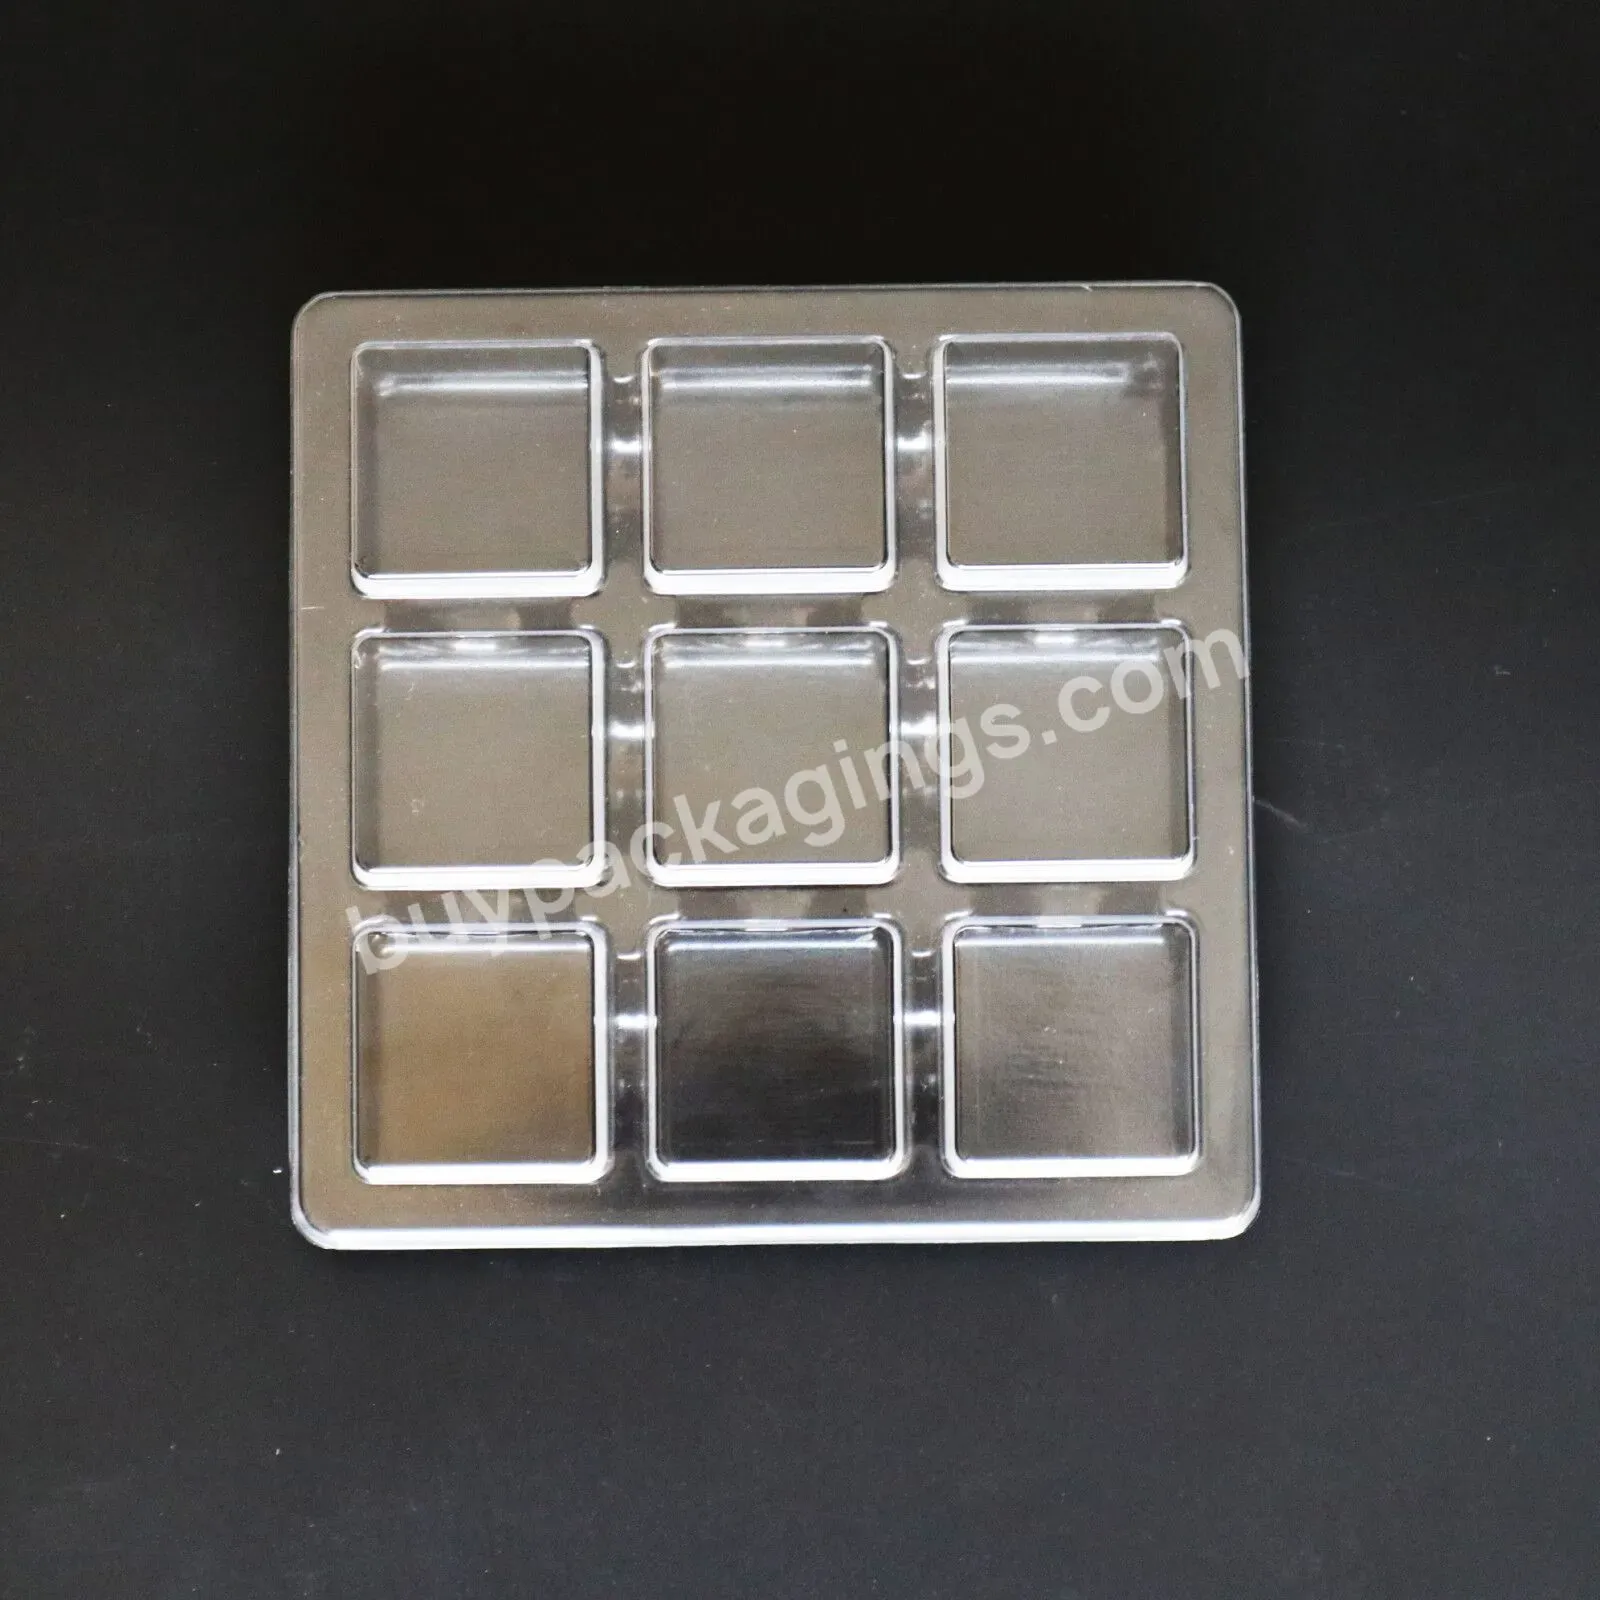 New Design Luxury Praline Chocolate Box Packaging Gift Box With Black Tray Clear Lid - Buy Chocolate Packaging Box,Chocolate Box,Store Dessert.